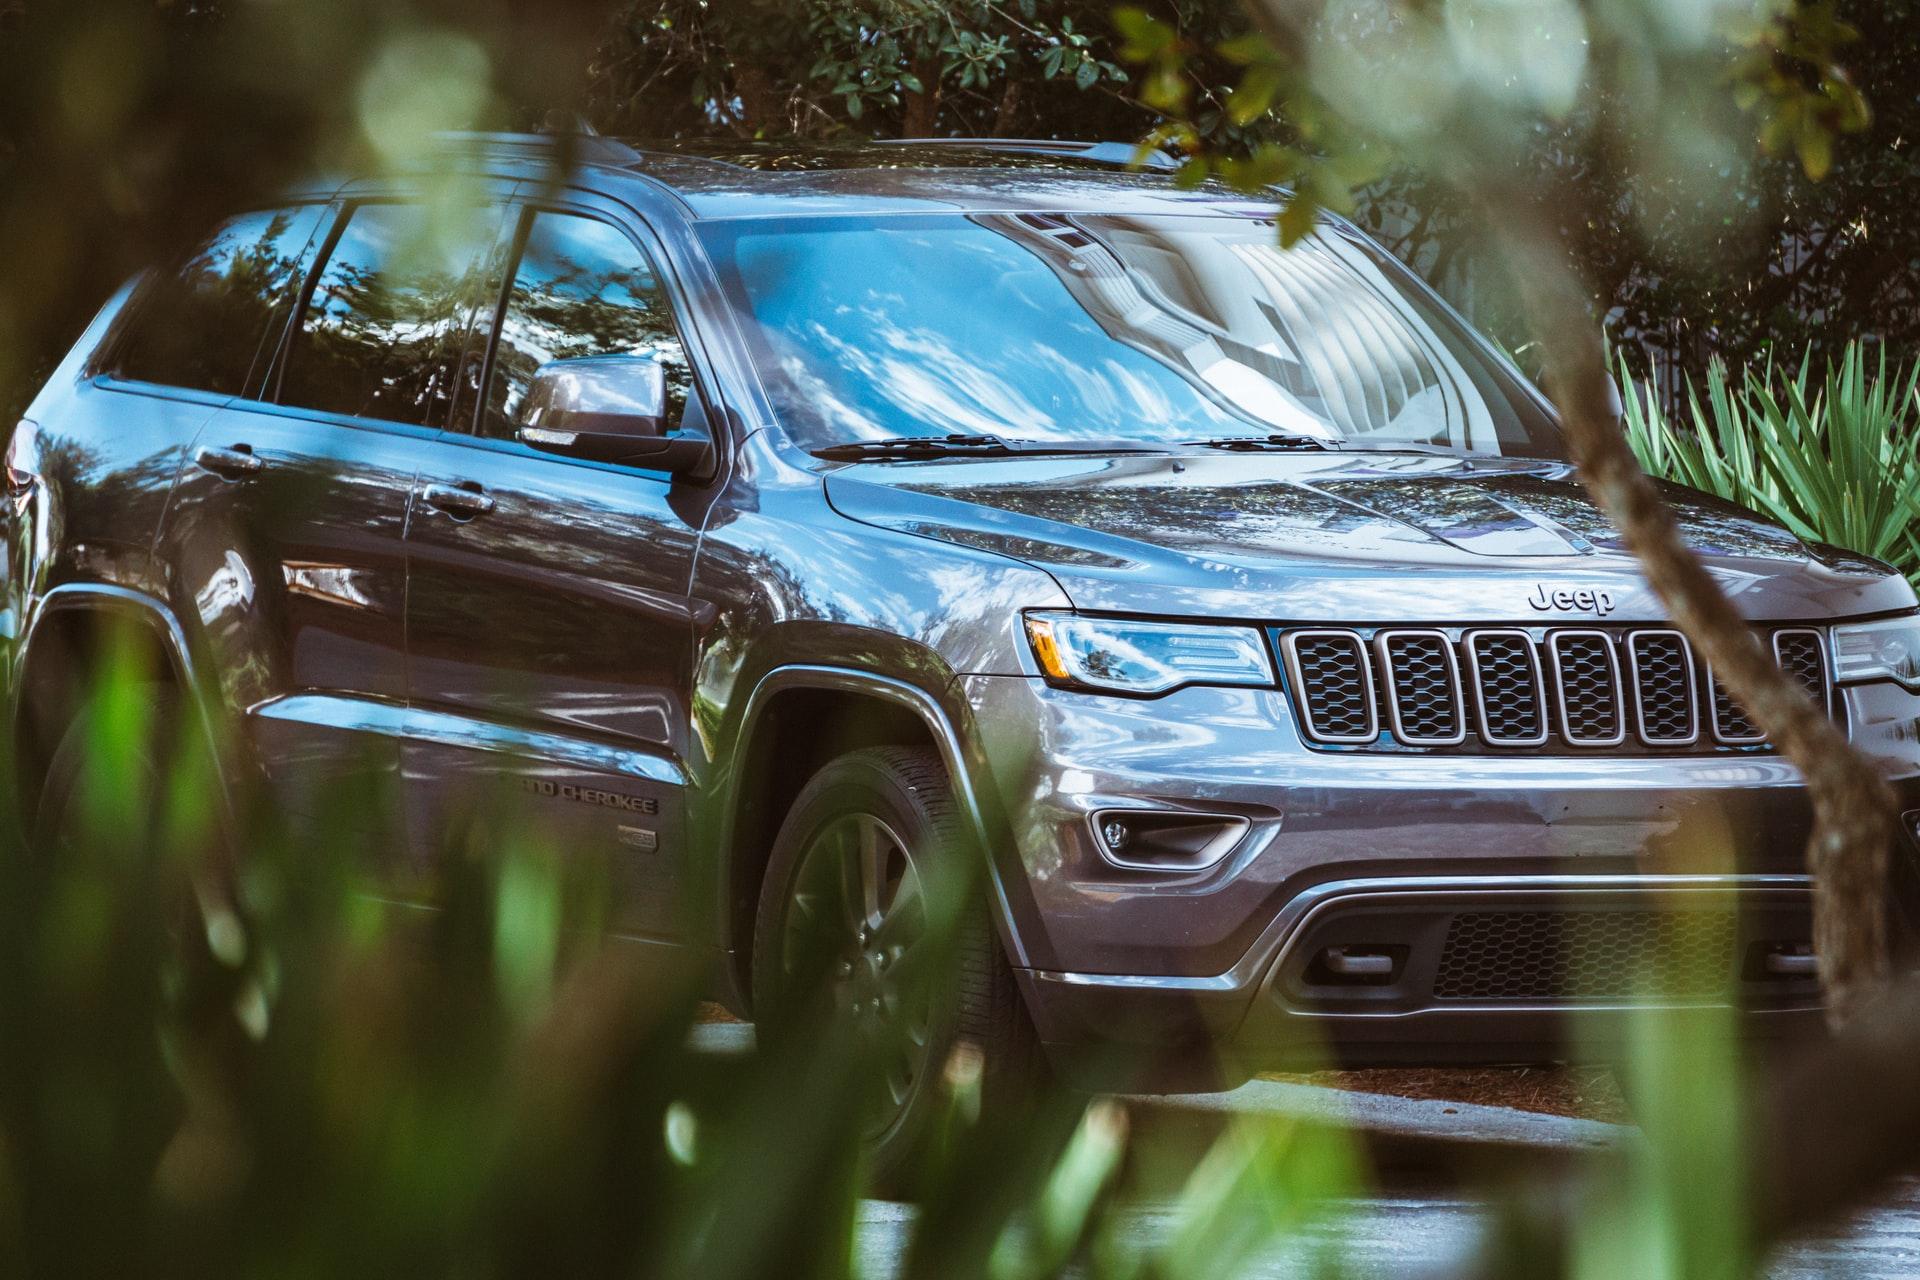 Whether you need seating space or off-roading capabilities, the Grand Cherokee has got you covered.